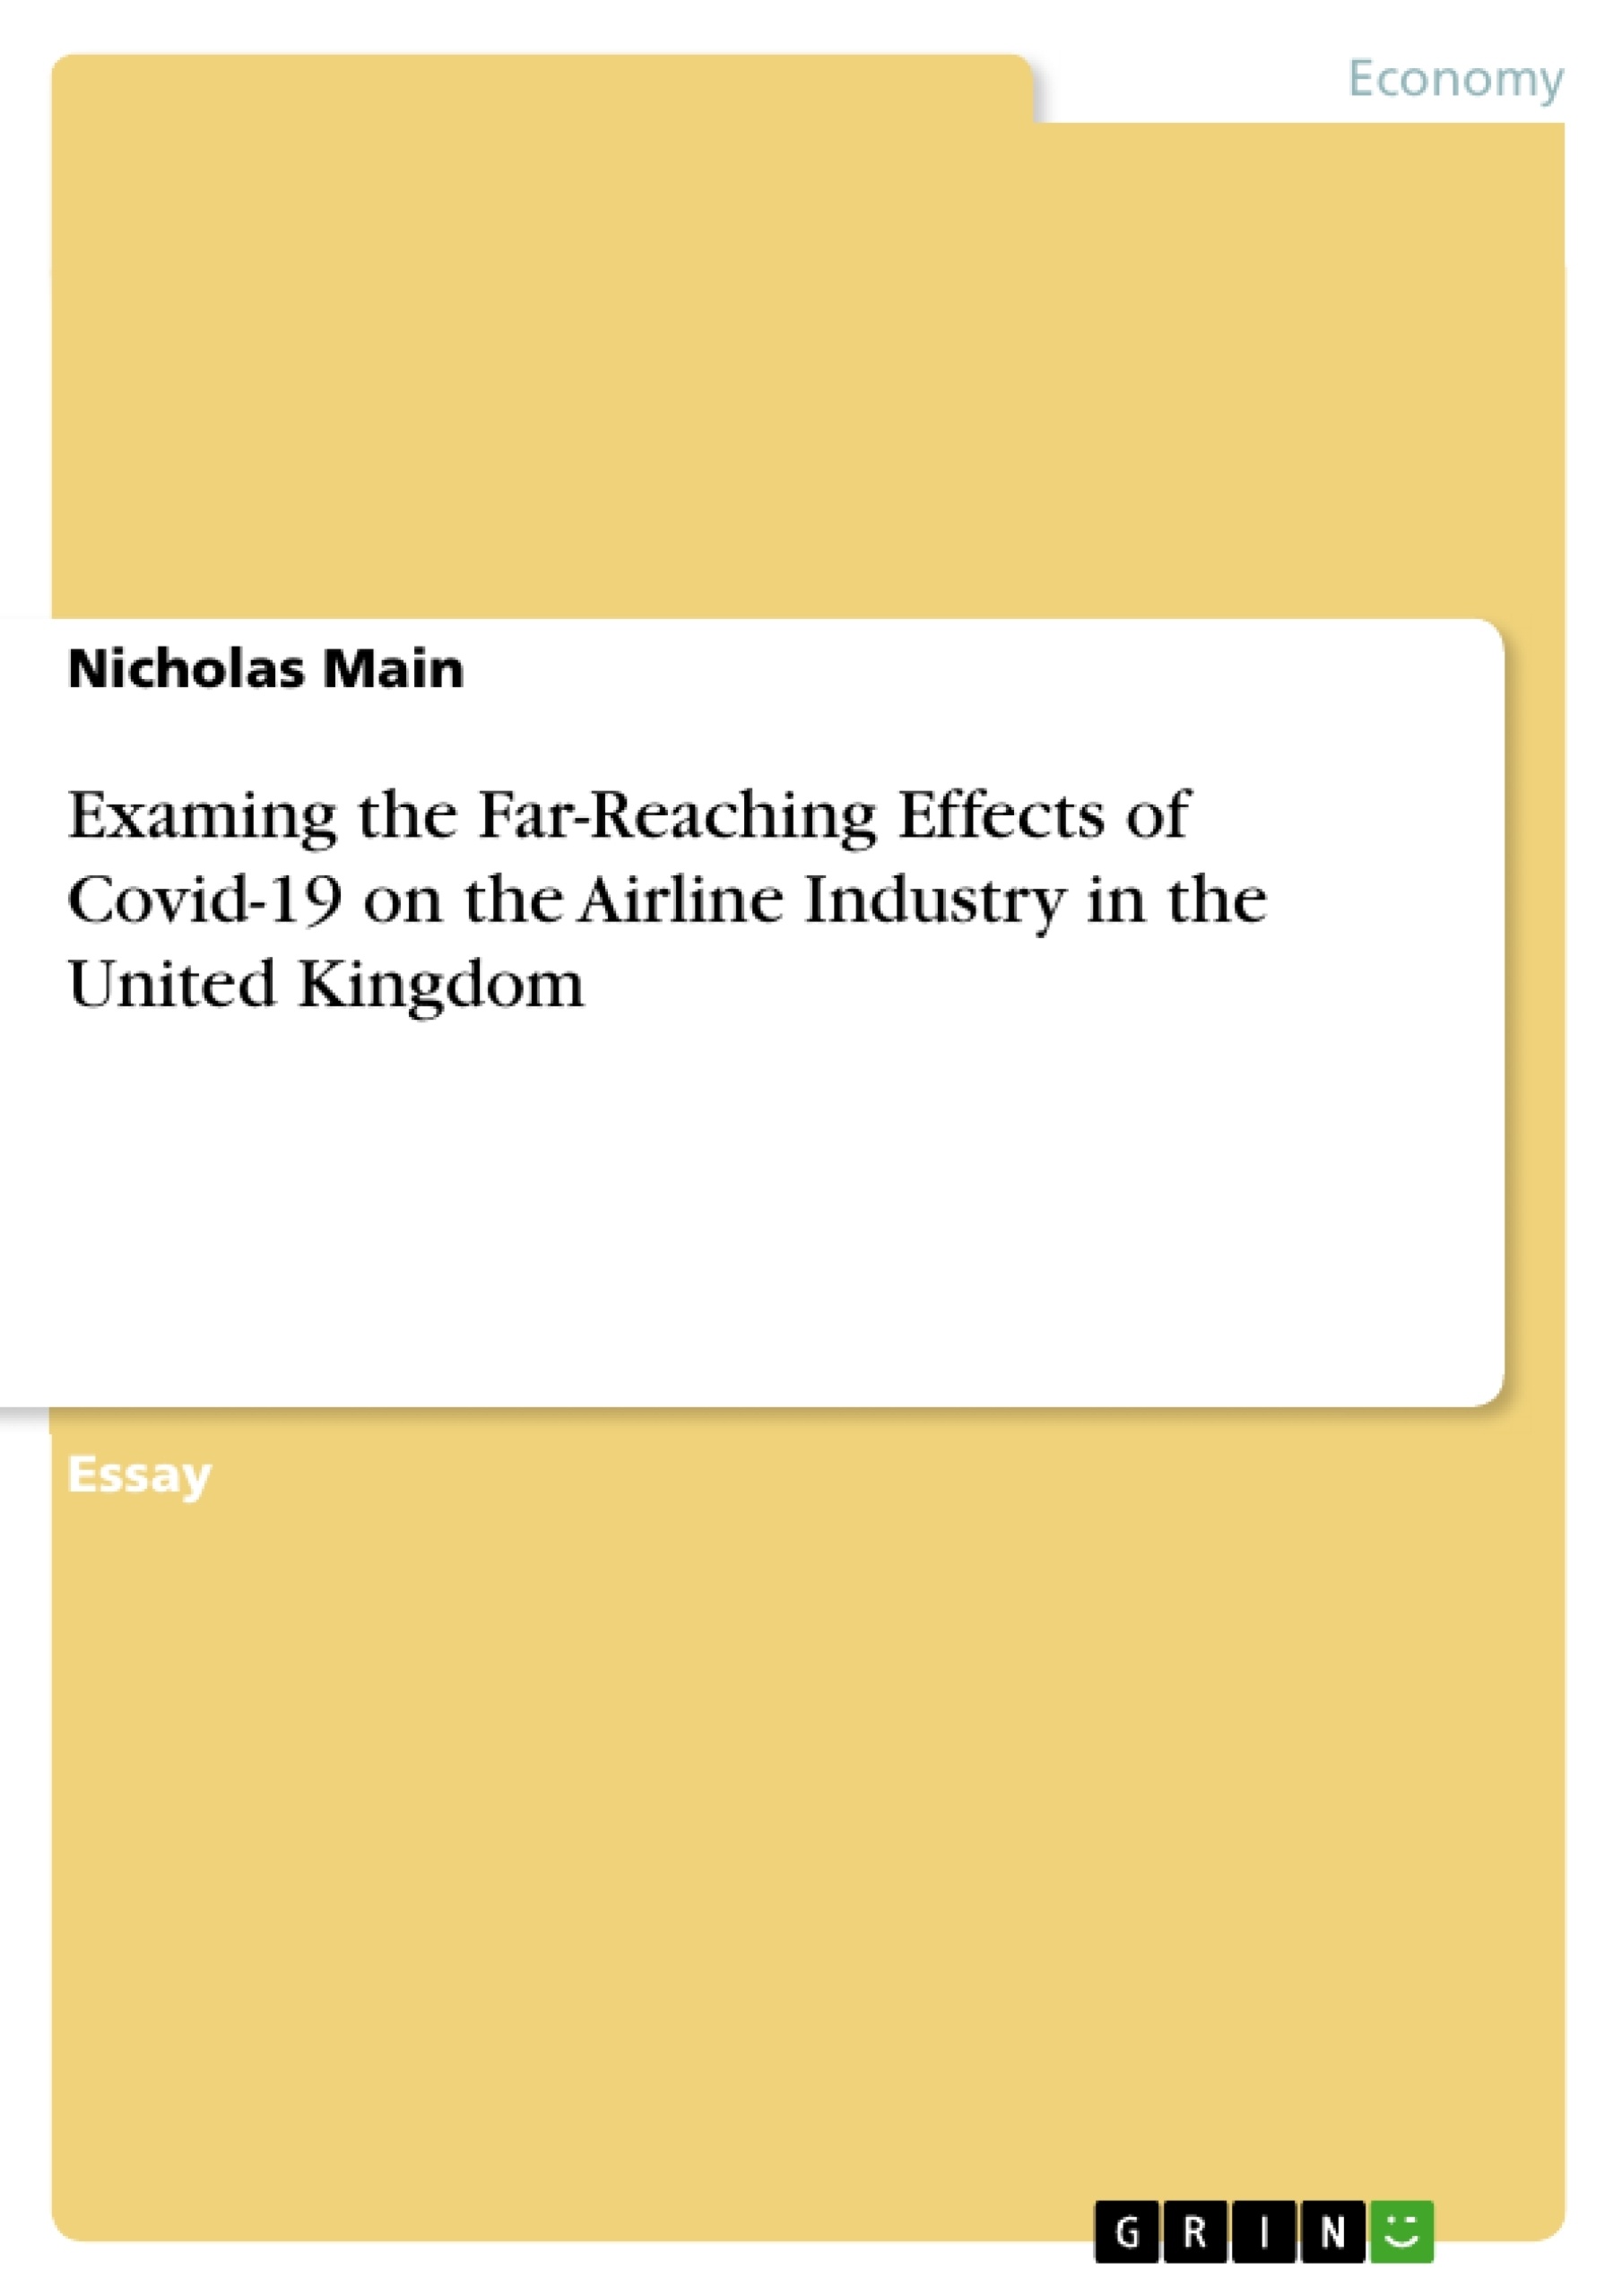 Title: Examing the Far-Reaching Effects of Covid-19 on the Airline Industry in the United Kingdom